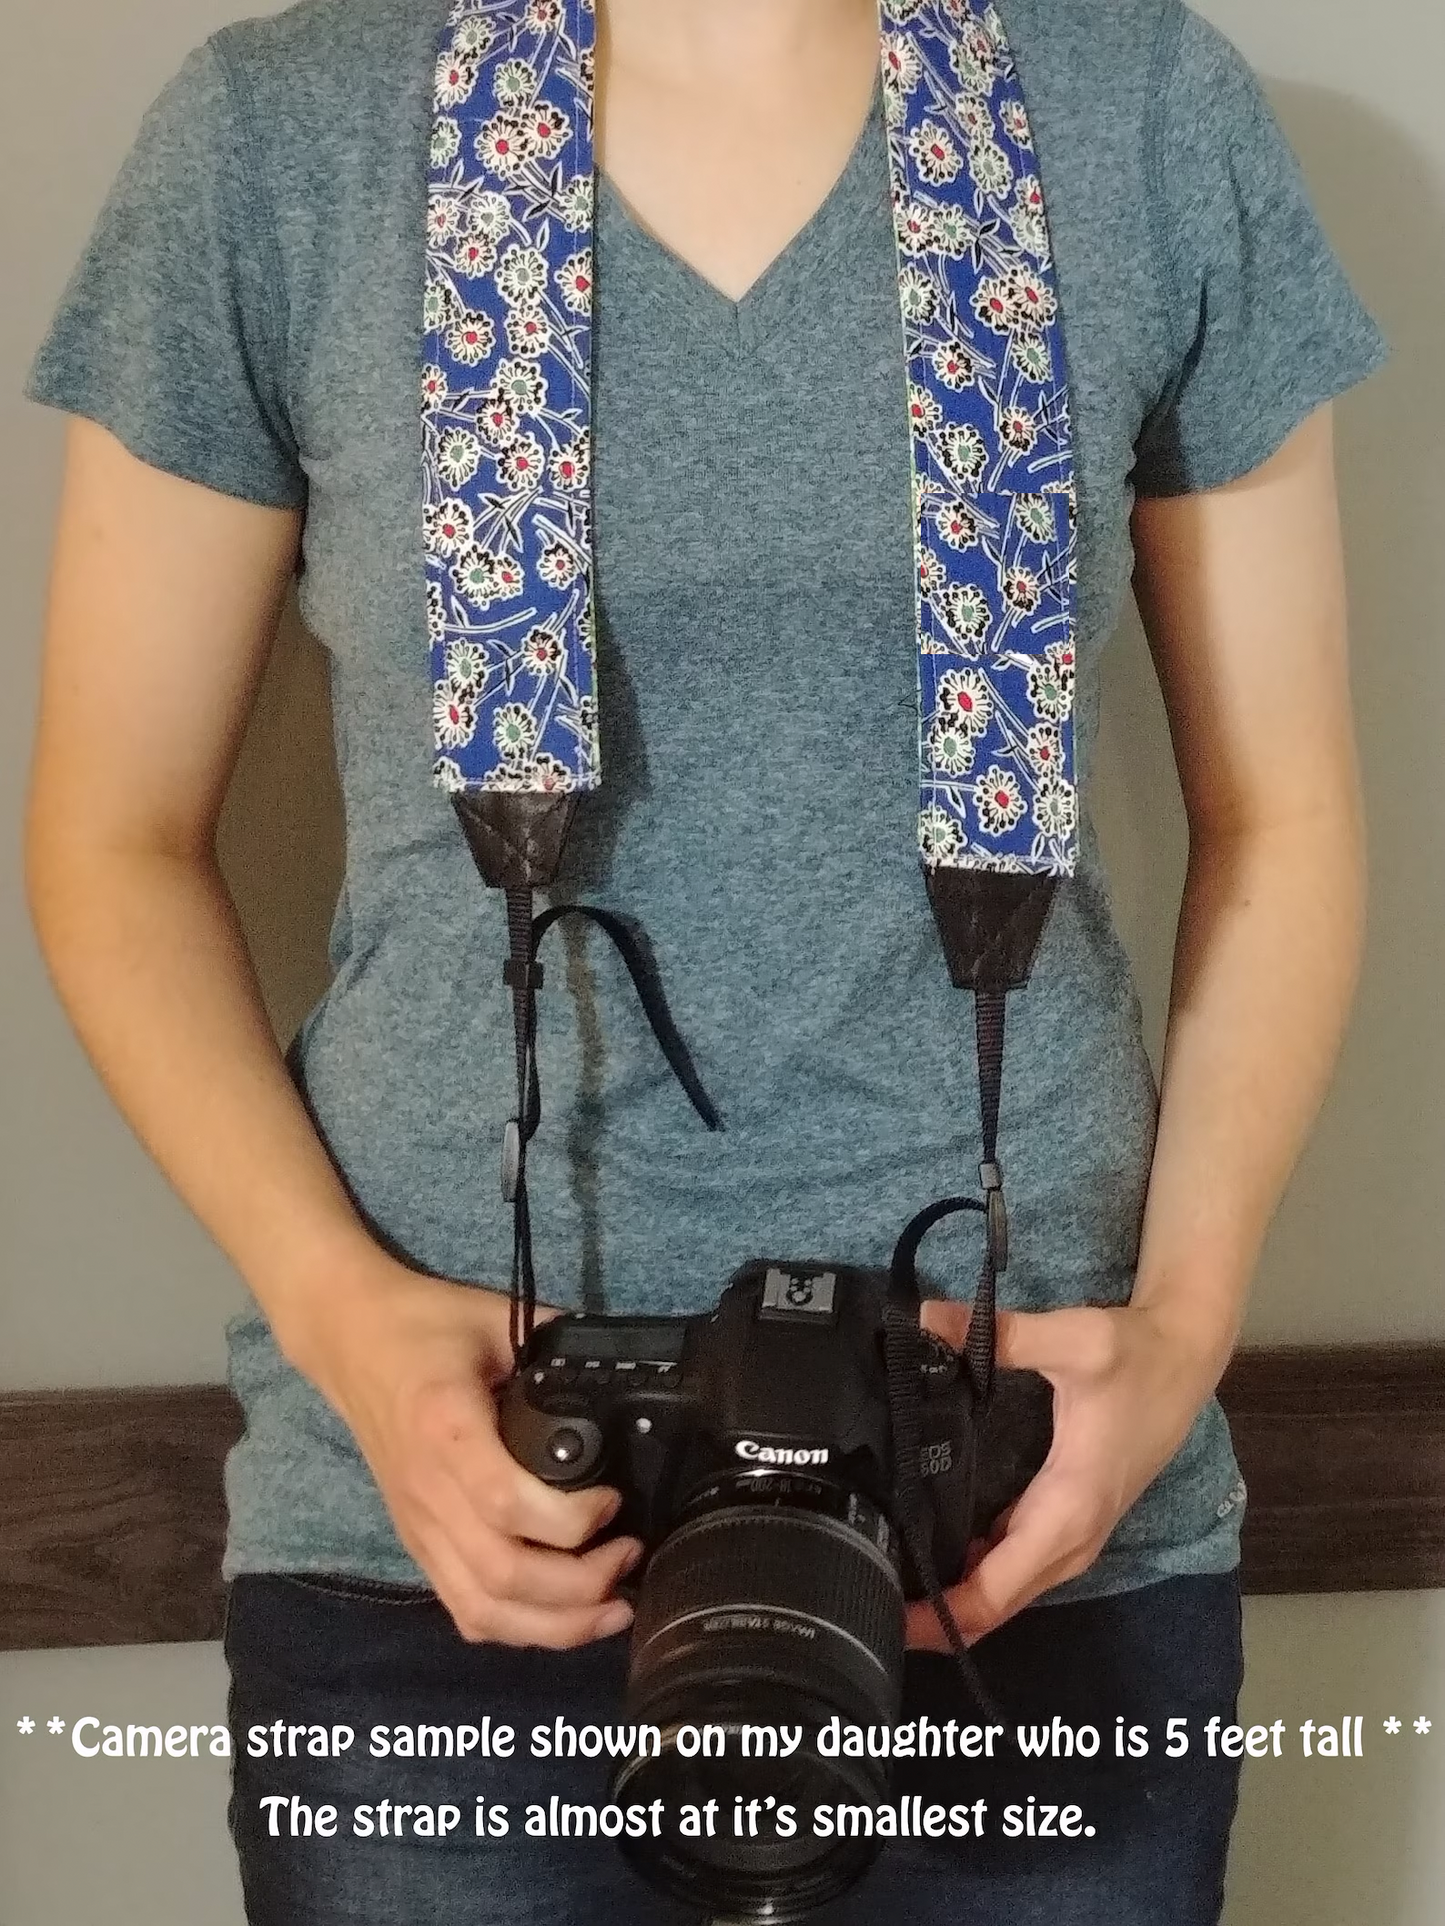 Paw Print Adjustable Handmade Fabric Camera Strap - DSLR Strap - Photography Accessories - Cat - Dog - Gift